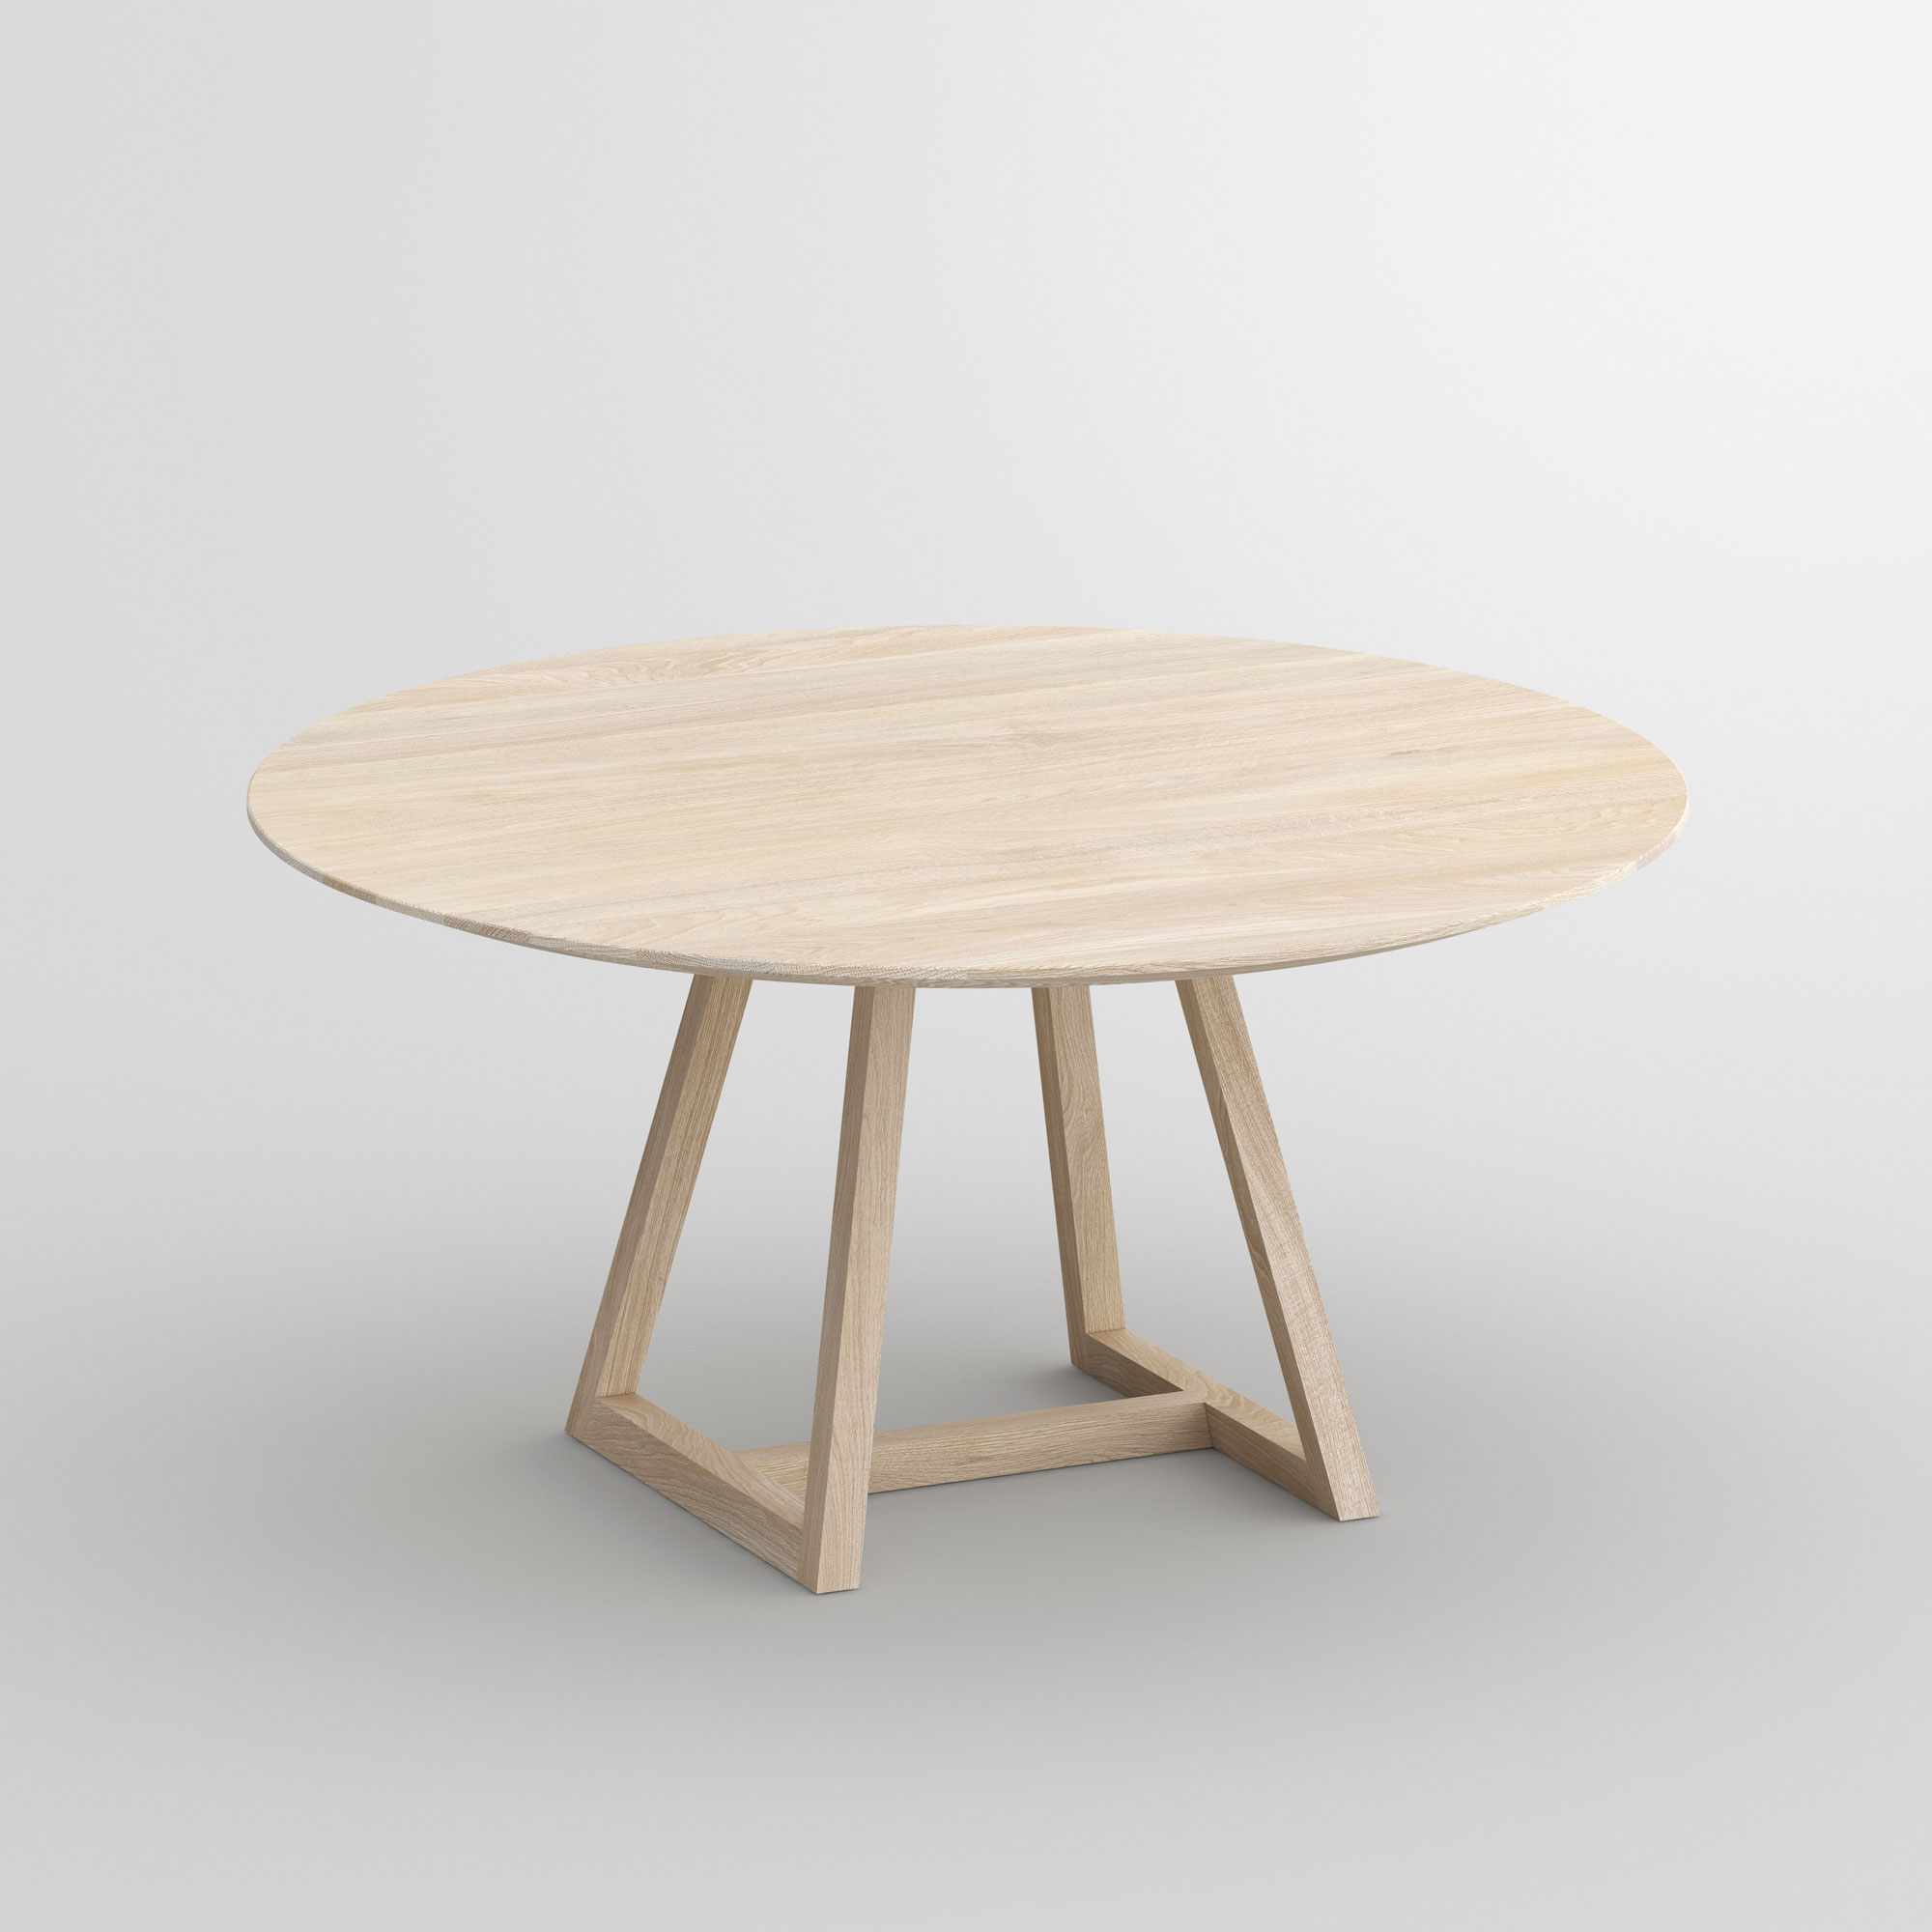 Round Table MARGO ROUND cam1 custom made in solid wood by vitamin design